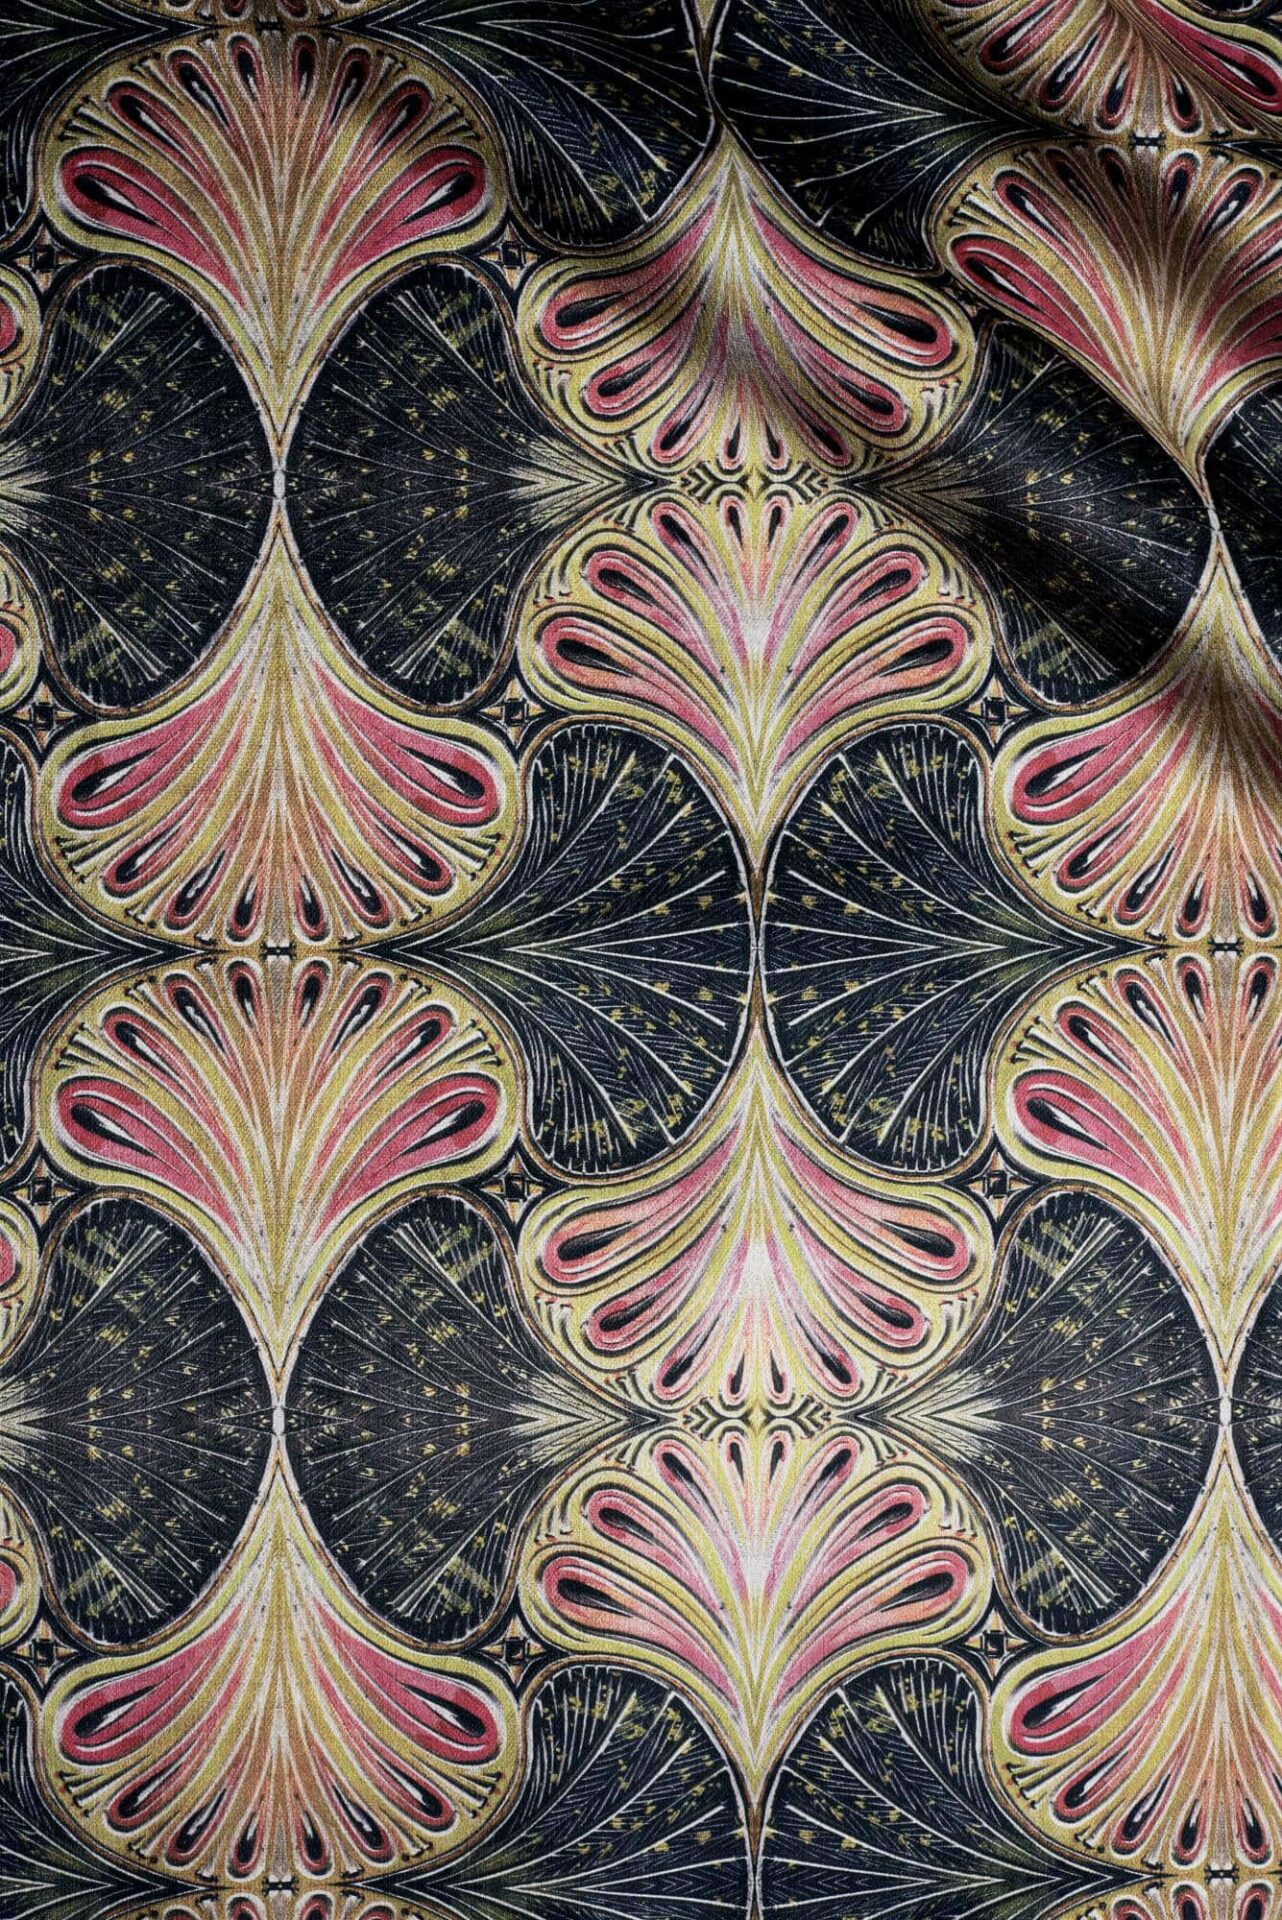 Showgirl Velvet Fabric All Products Anna Hayman Designs